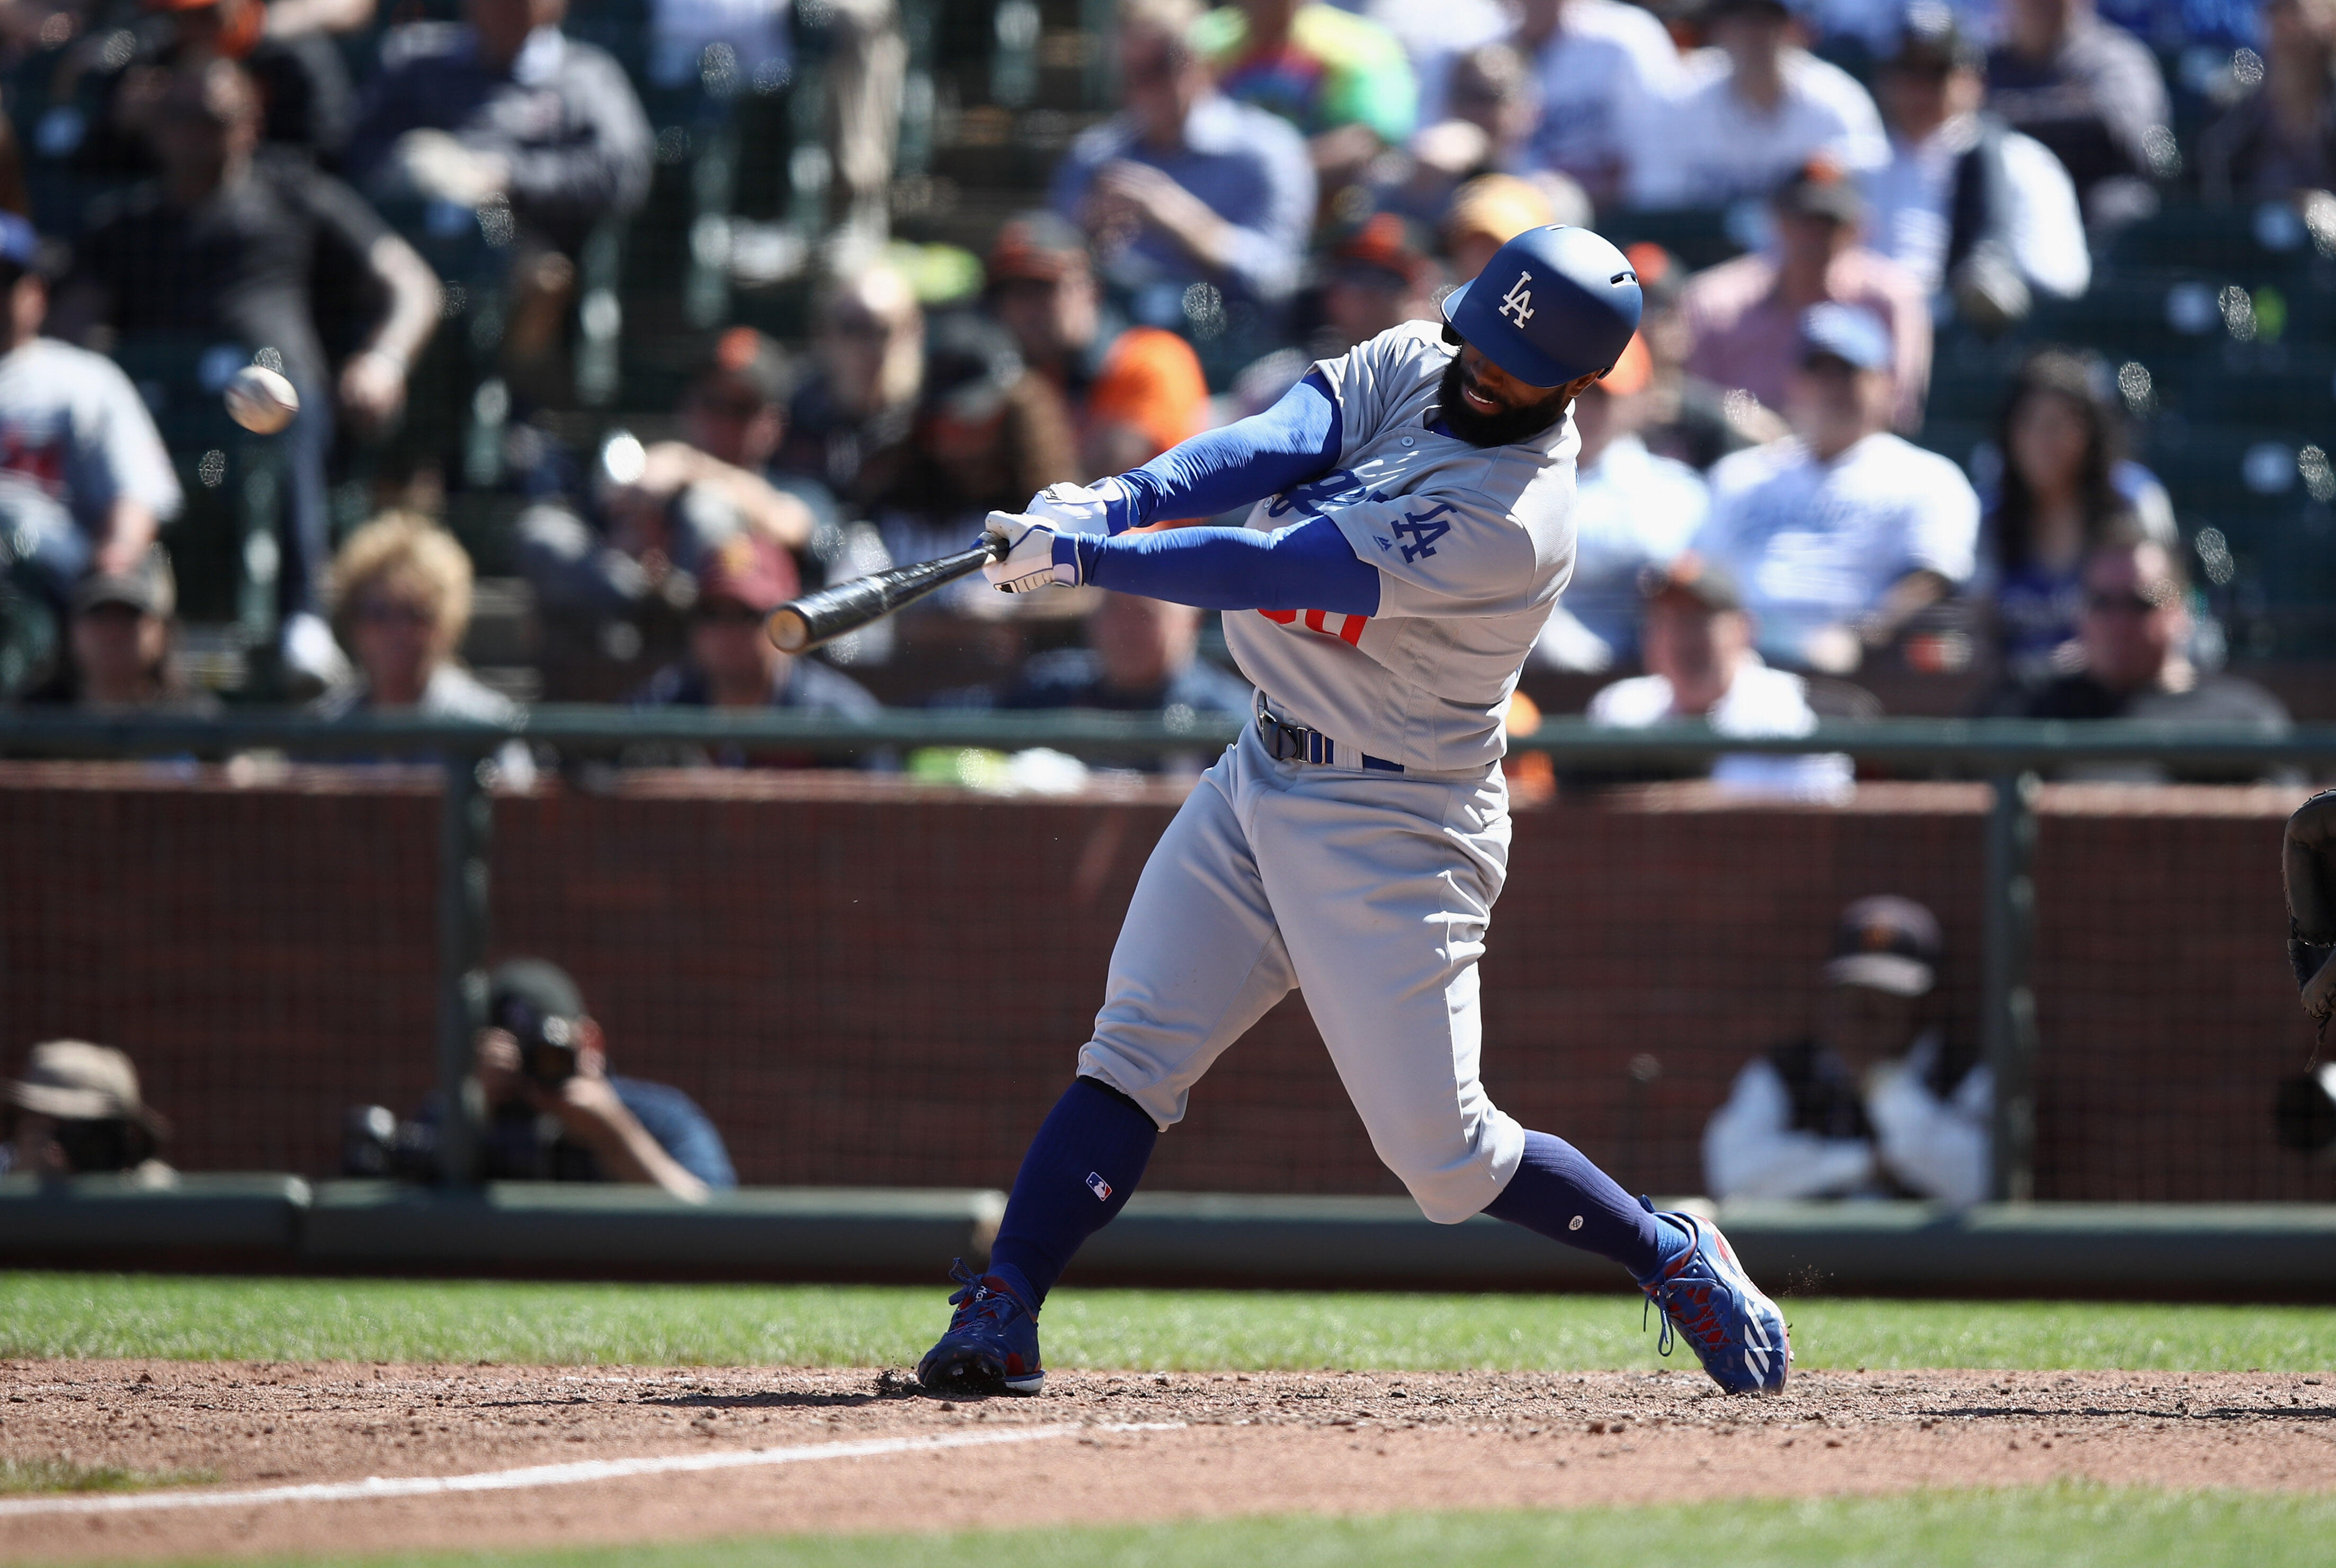 SAN FRANCISCO, CA - APRIL 27:  Andrew Toles #60 of the Los Angeles Dodgers hits a single that scored Ross Stripling #68 in the 10th inning against the San Francisco Giants at AT&T Park on April 27, 2017 in San Francisco, California.  (Photo by Ezra Shaw/G